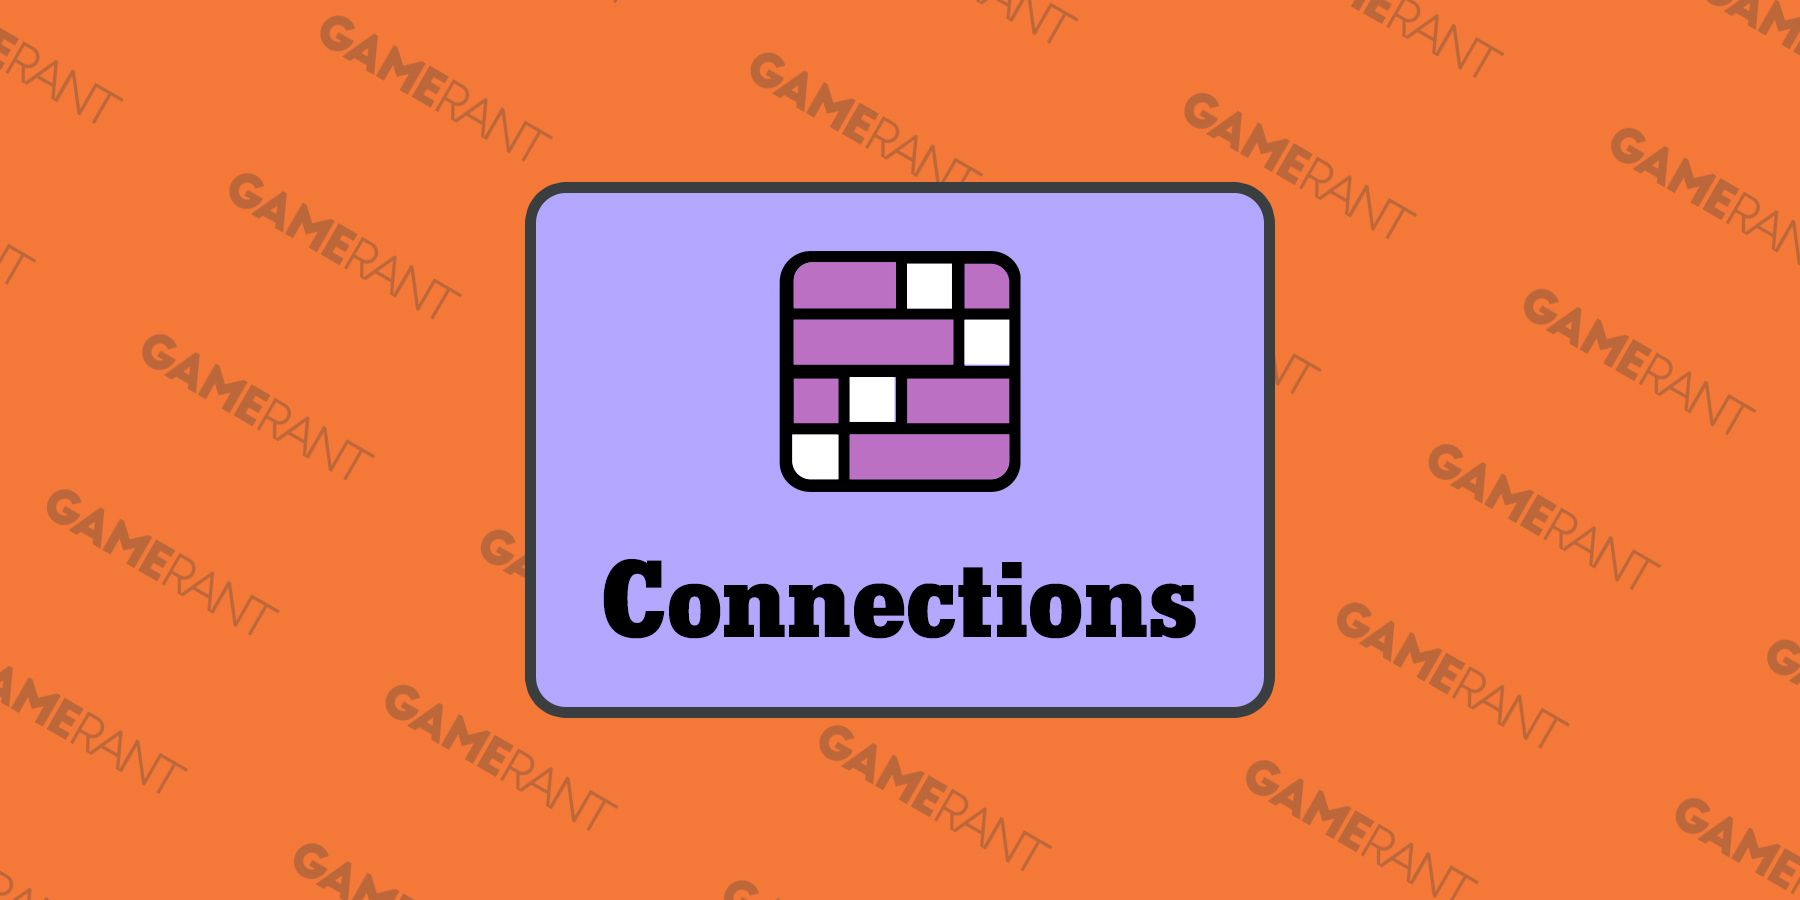 Connections hint today